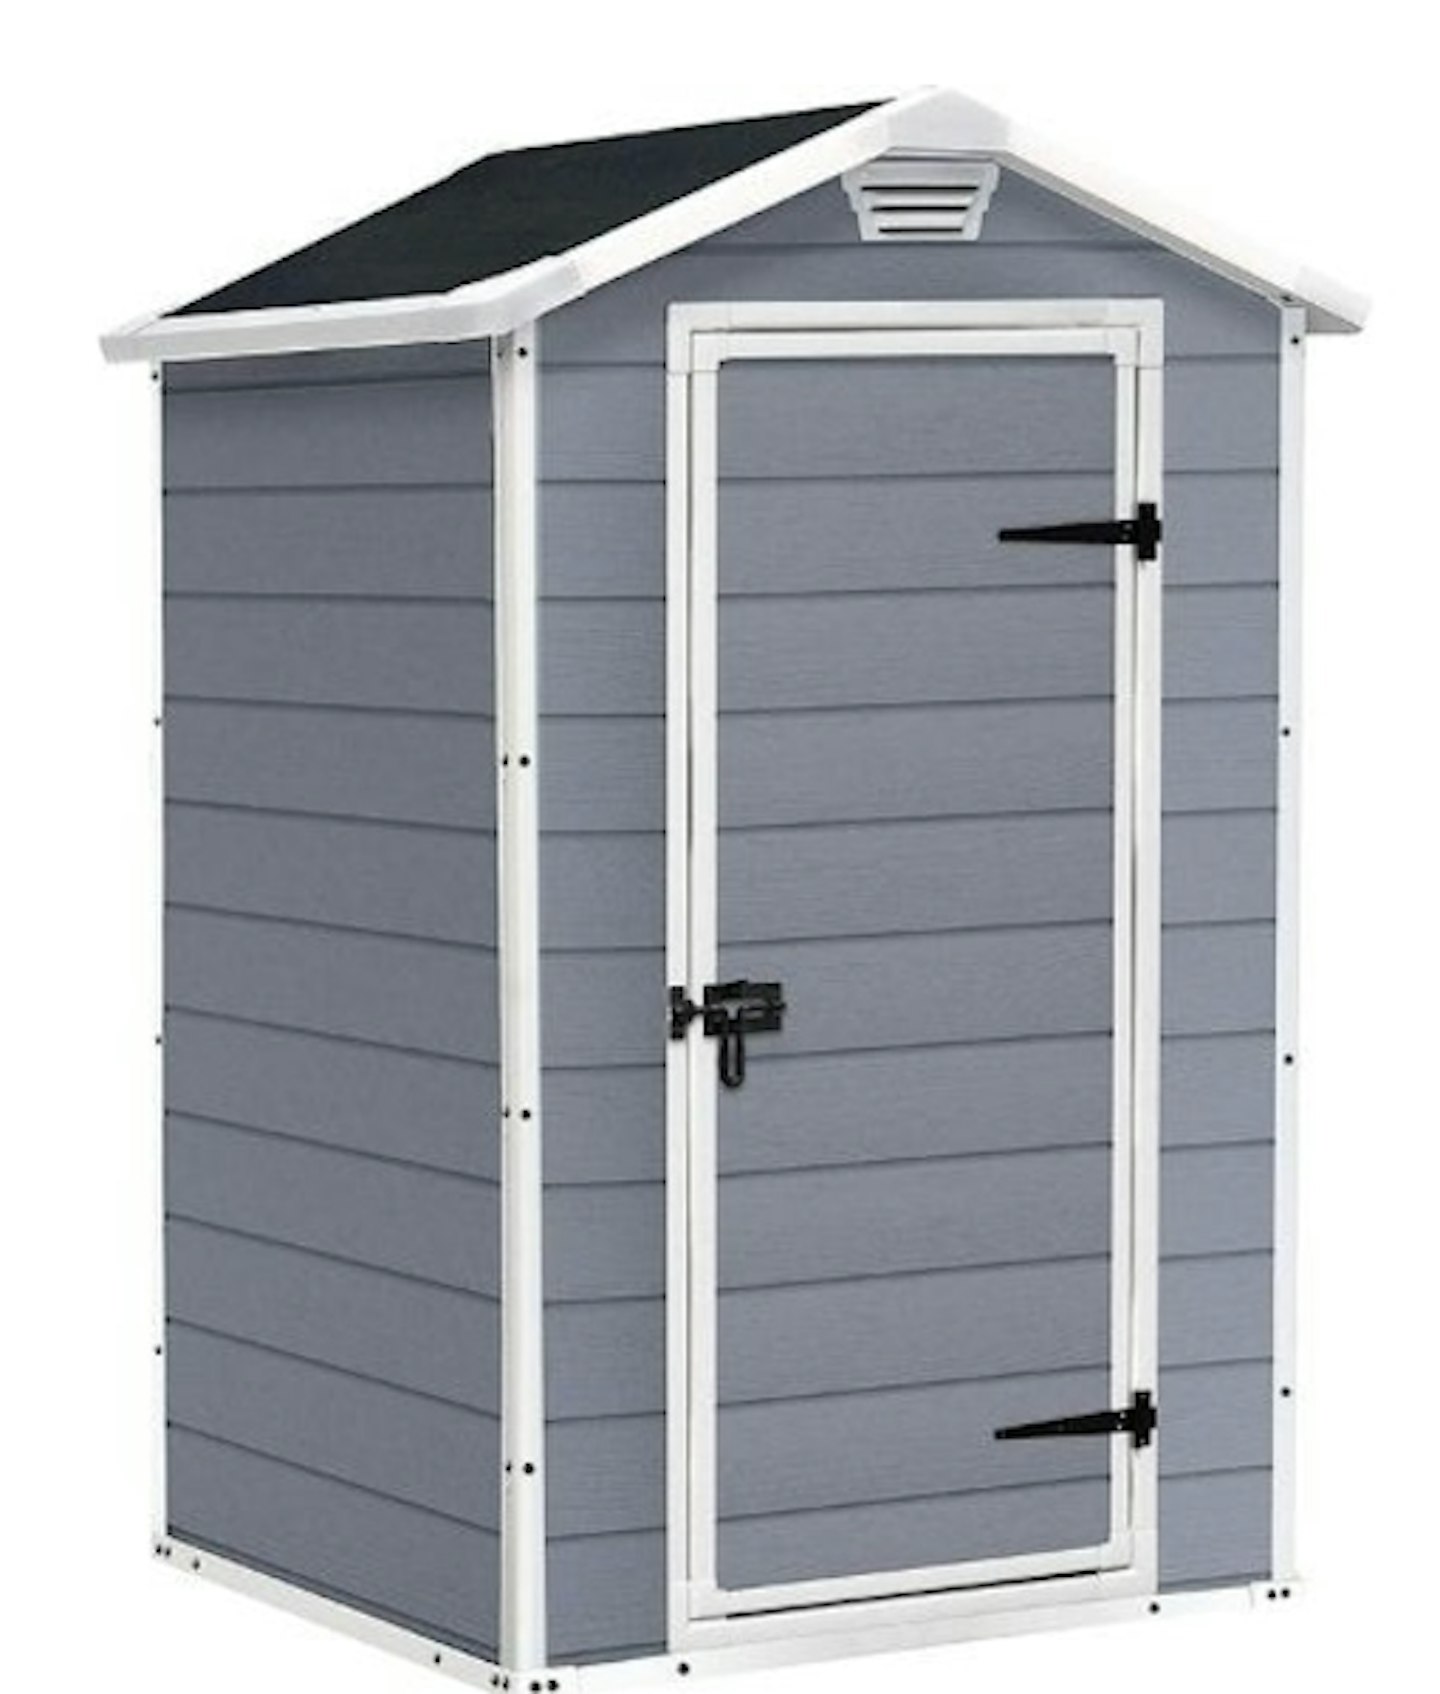 Keter Manor 4x3 Apex Grey Plastic Shed